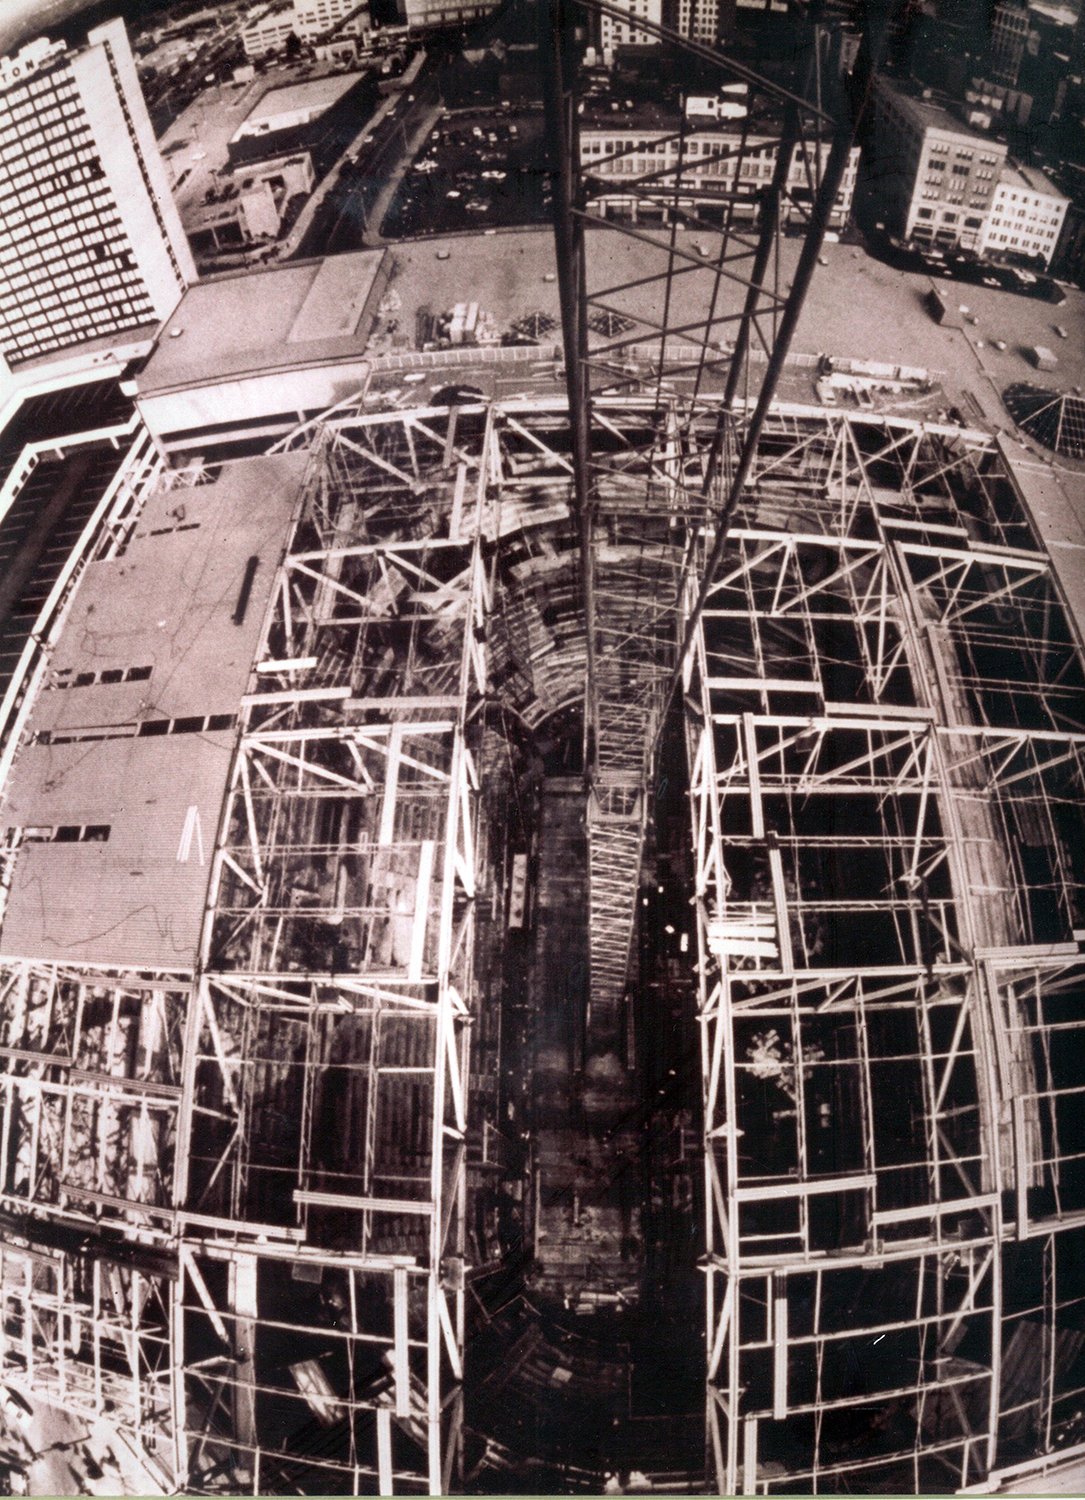 BVH on X: 40 yrs ago today, the #Hartford Civic Center's roof